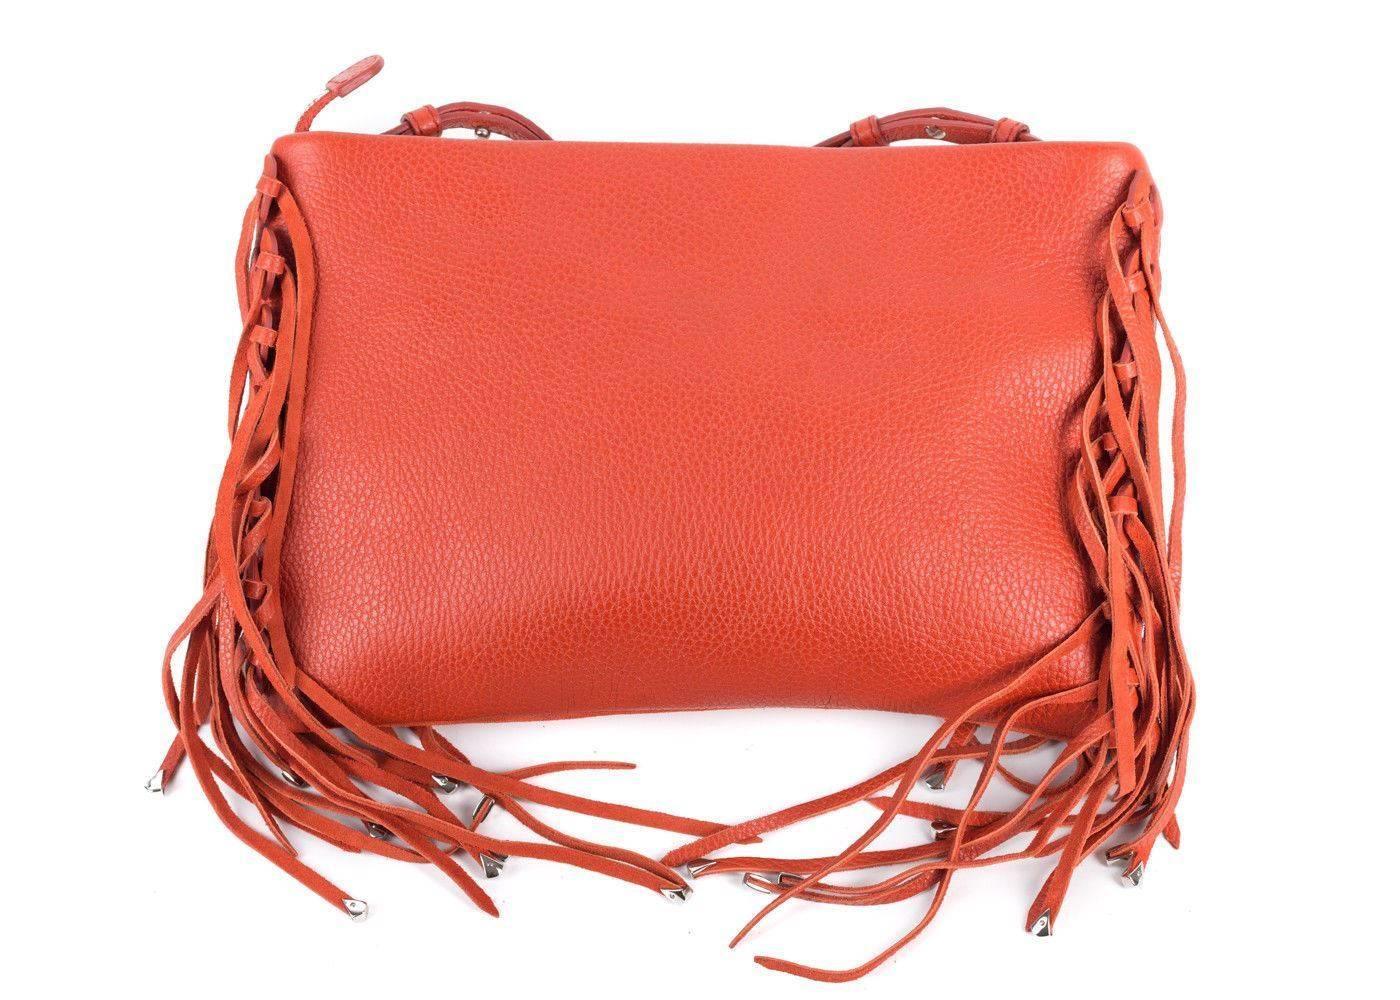 Brand New Roberto Cavalli Suede Fringe Edge Handbag
Original Tag & Sleeper Bag
Retails in Stores & Online for $850
Size 8.5 H x 1 D x 12 L

The orange Roberto Cavalli bag is your Fall season must have. You can pair this suede front beauty